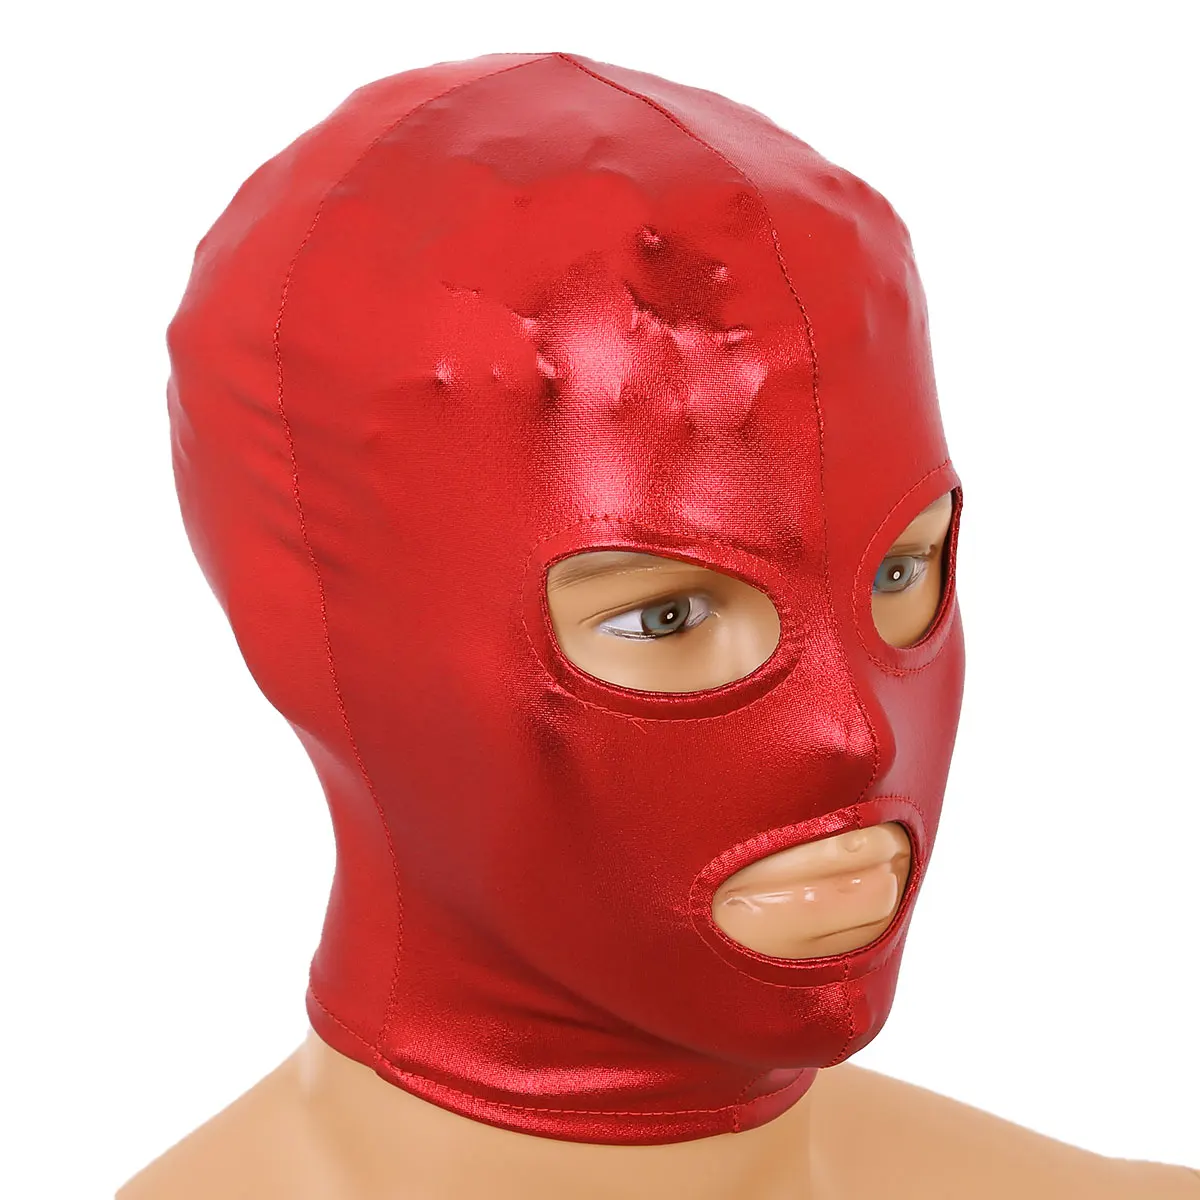 Unisex Men Women Cosplay Face Mask Latex Shiny Metallic Open Eyes and Mouth Headgear Full Eyewear Hood for Role Play Costumes